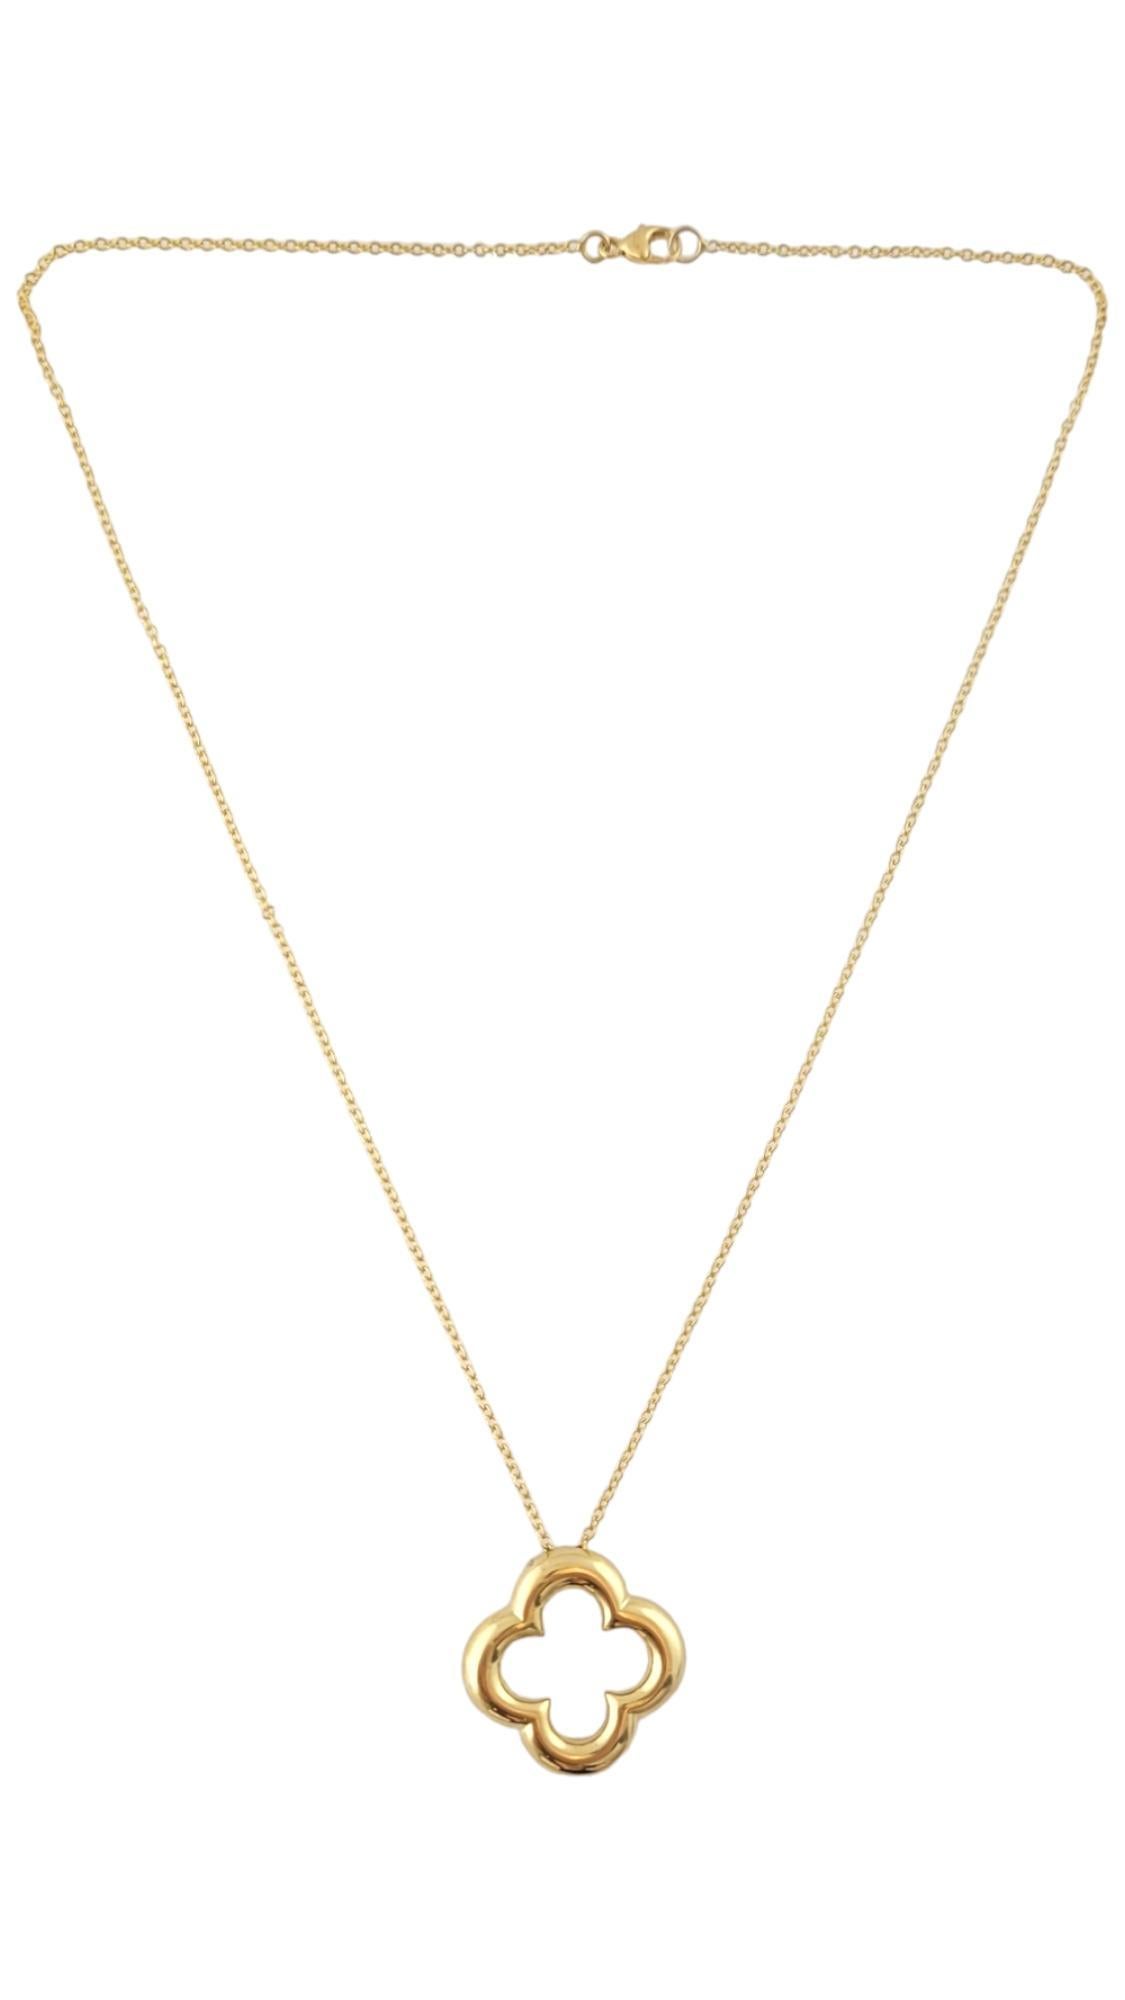 18K Yellow Gold Jean Vitale Clover Necklace

This gorgeous piece by Jean Vitale features a beautiful 18K yellow gold clover pendant paired with an 18K gold chain!

Chain length: 17